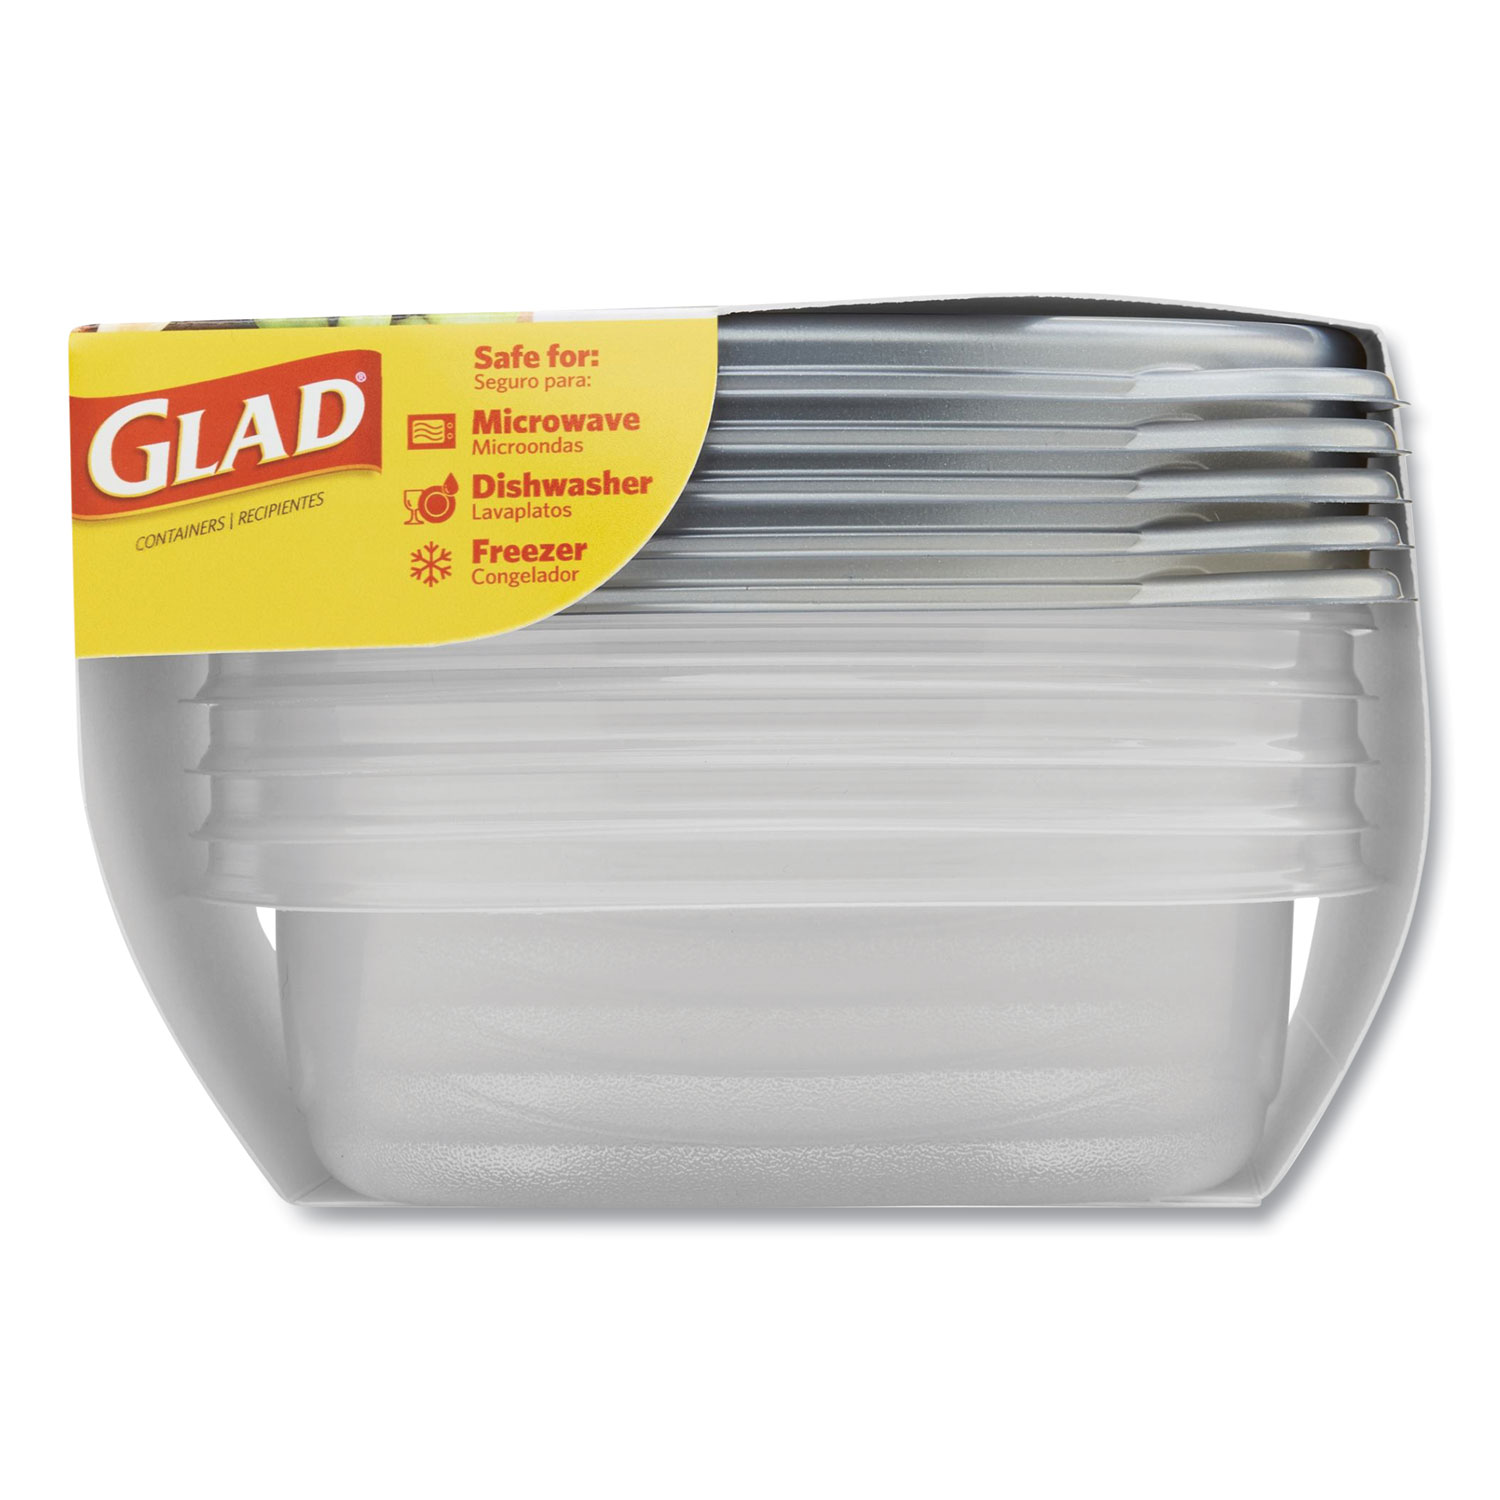 Glad® Home Collection Food Storage Containers with Lids - Clorox  Professional CLOXZA60795 PK - Betty Mills